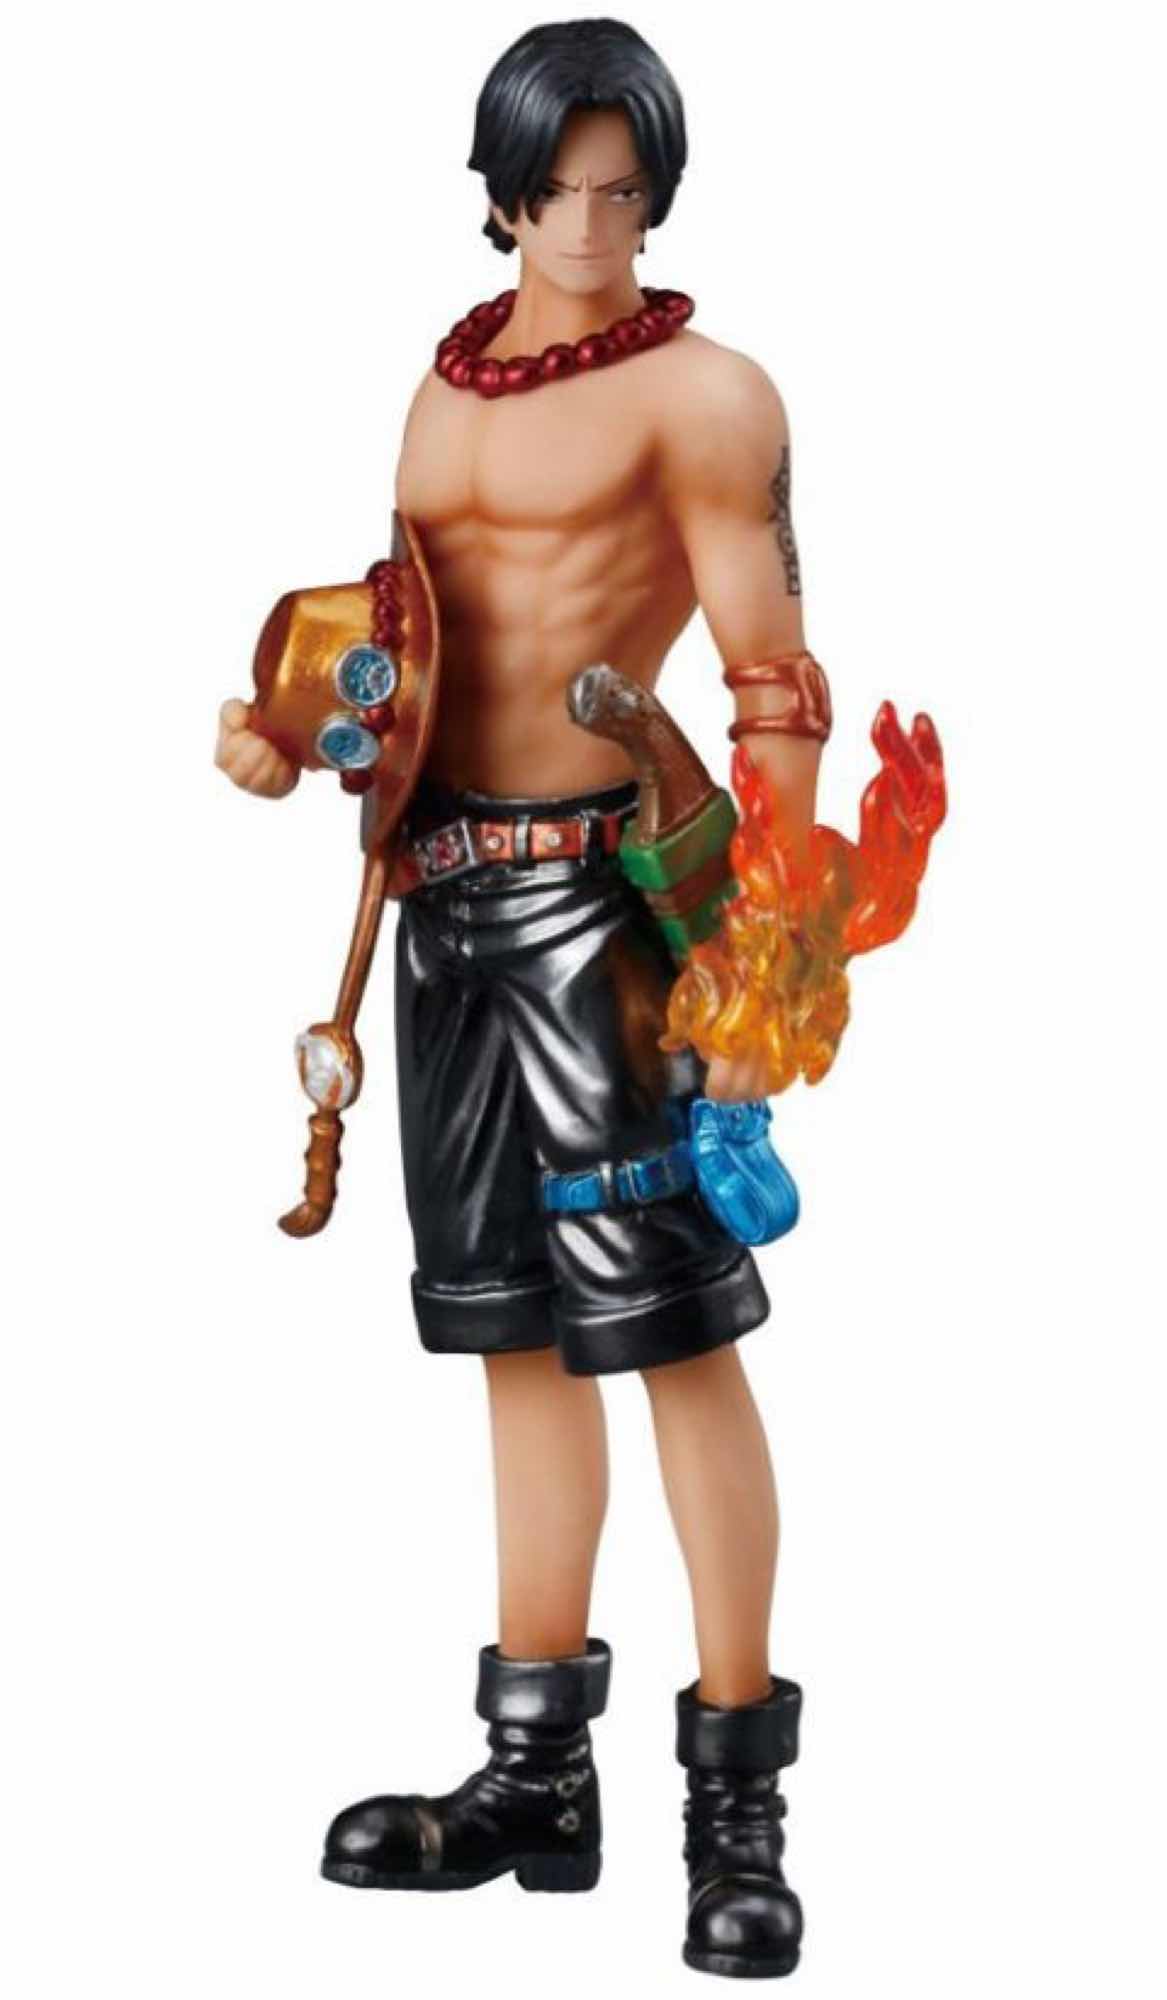 ACE FIGURA 12 CM ONE PIECE SUPER STYLING VALIANT MATERIAL